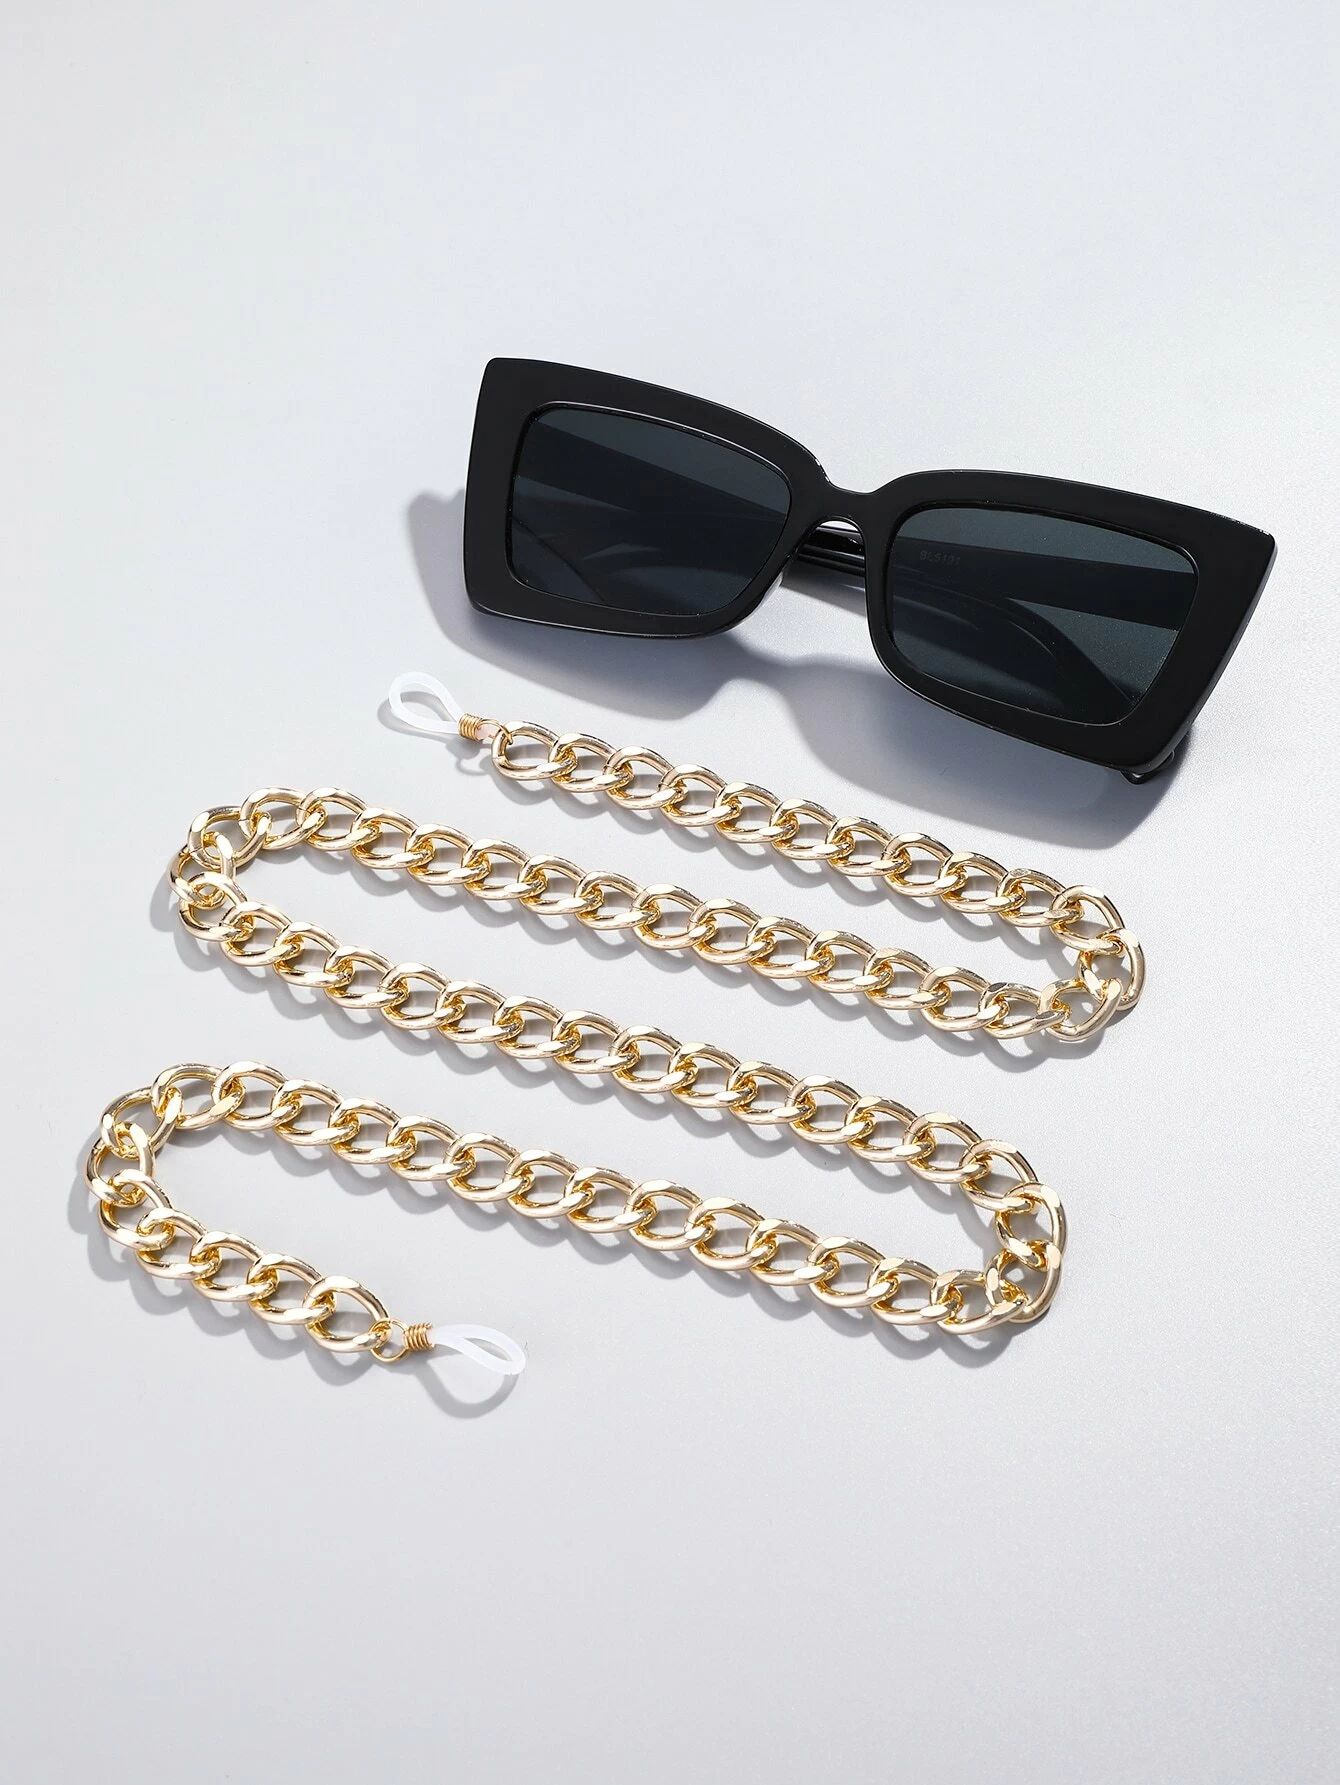 Acrylic Frame Sunglasses With Metal Glasses Chain | SHEIN